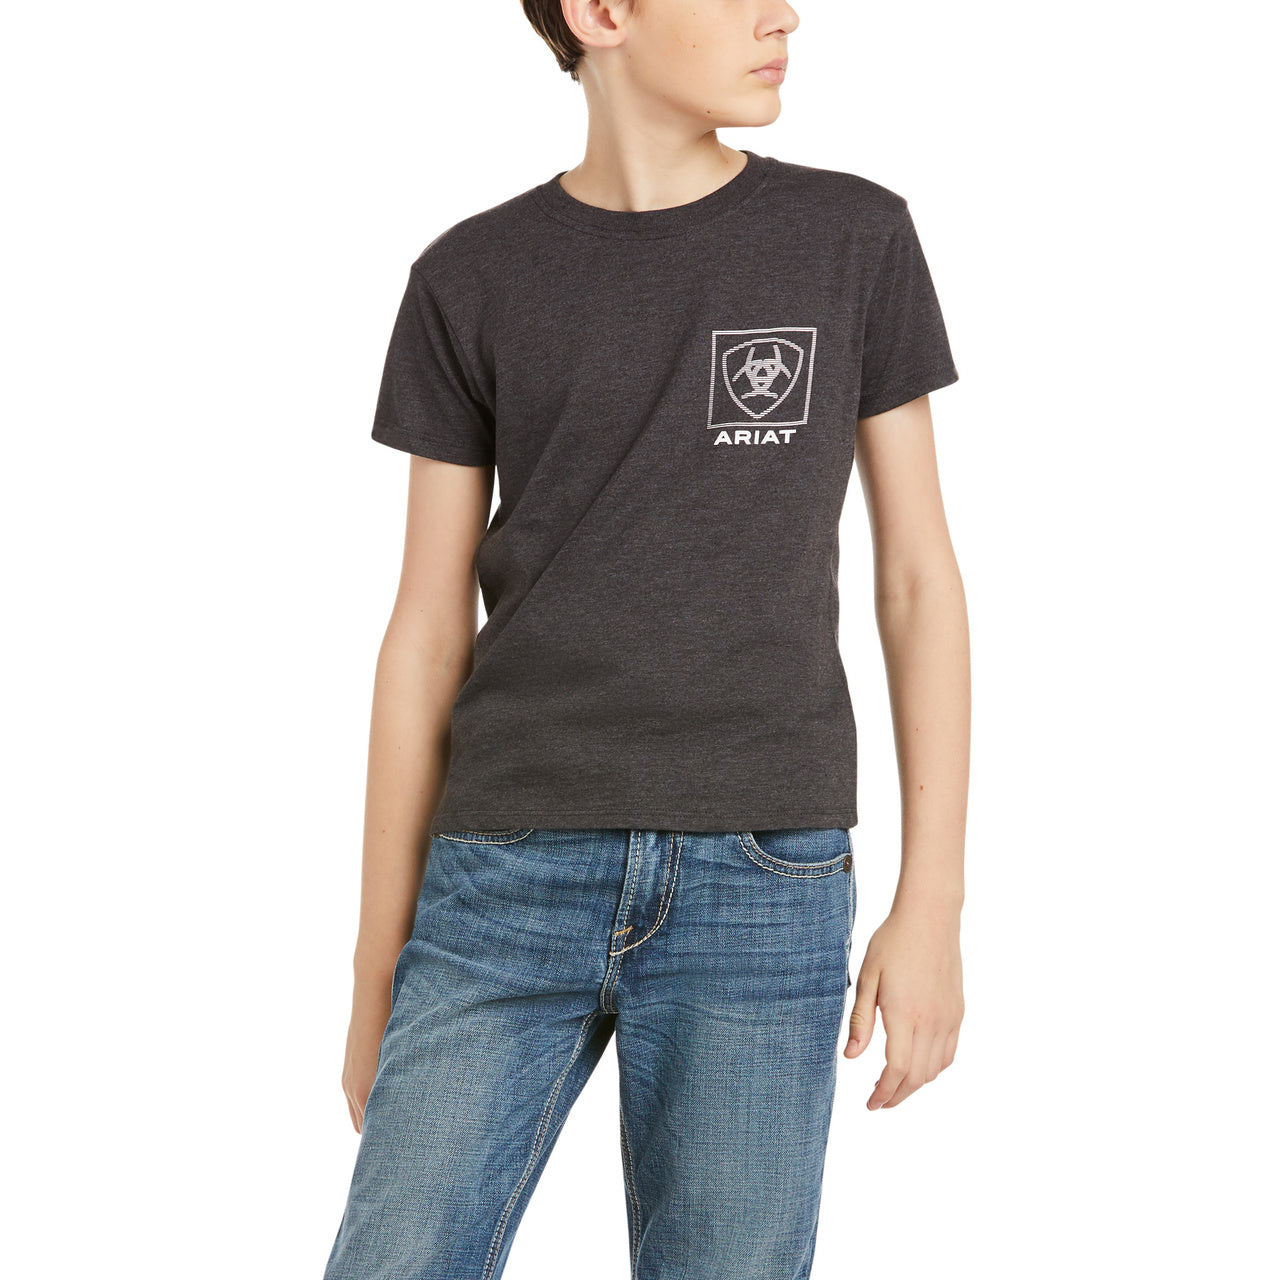 Ariat Children's Linear Charcoal Heather Tee 10036554